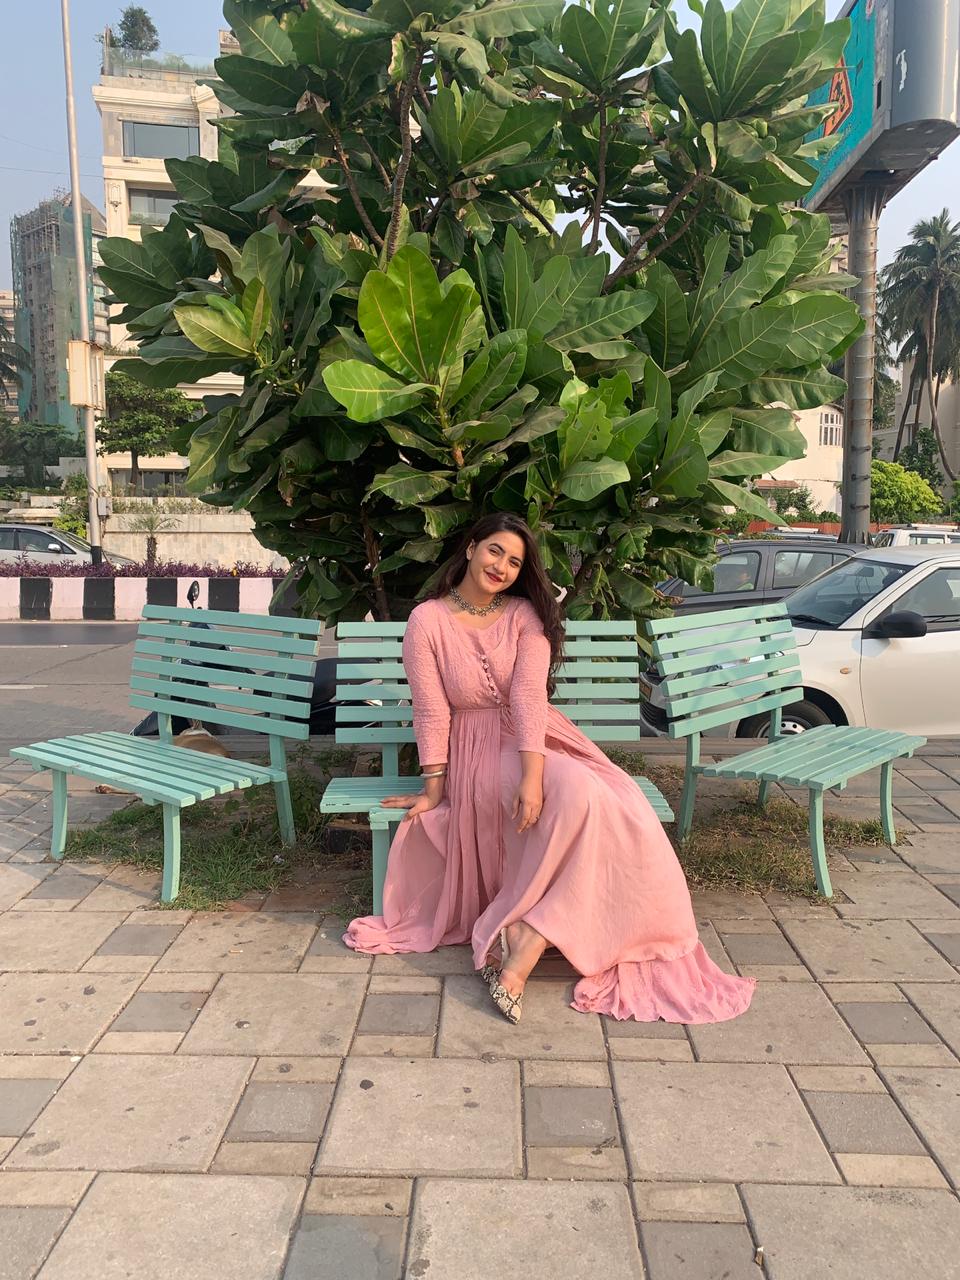 Popular Television actress Meera Deosthale slays the Autumn look | Exclusive PhotoShoot pics inside!  